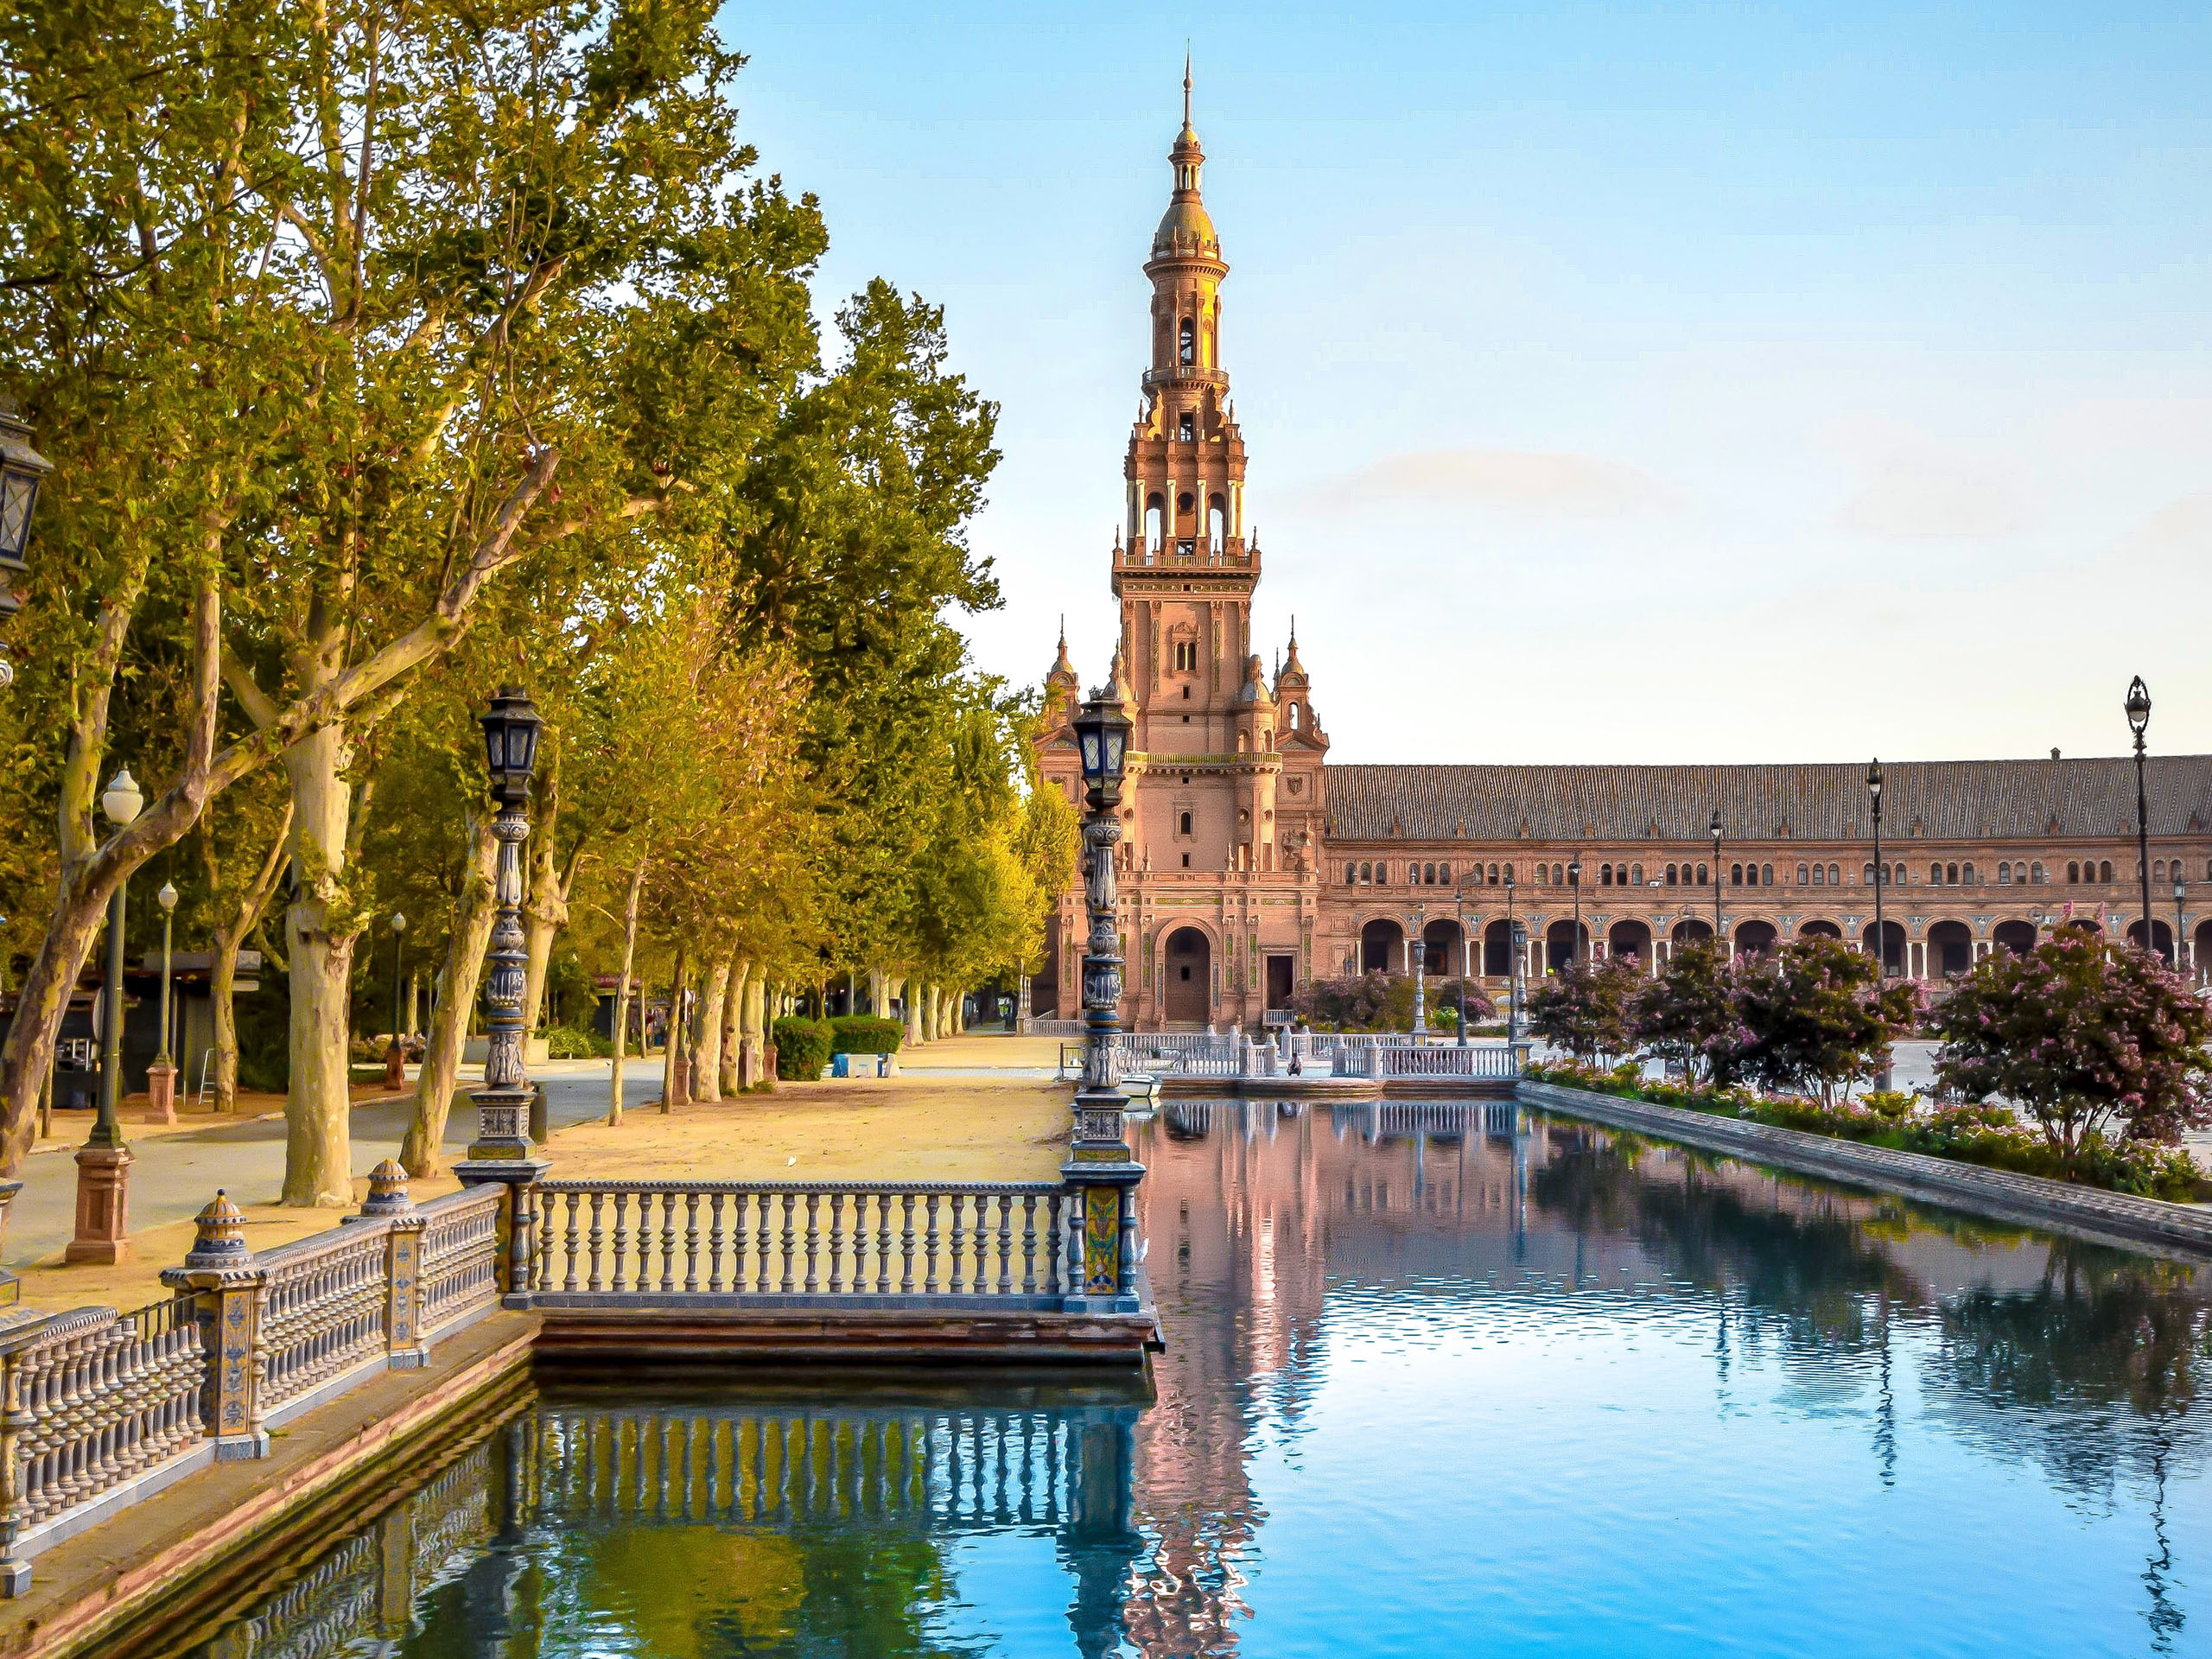 Stage 1 - Wander through the busy city of Seville